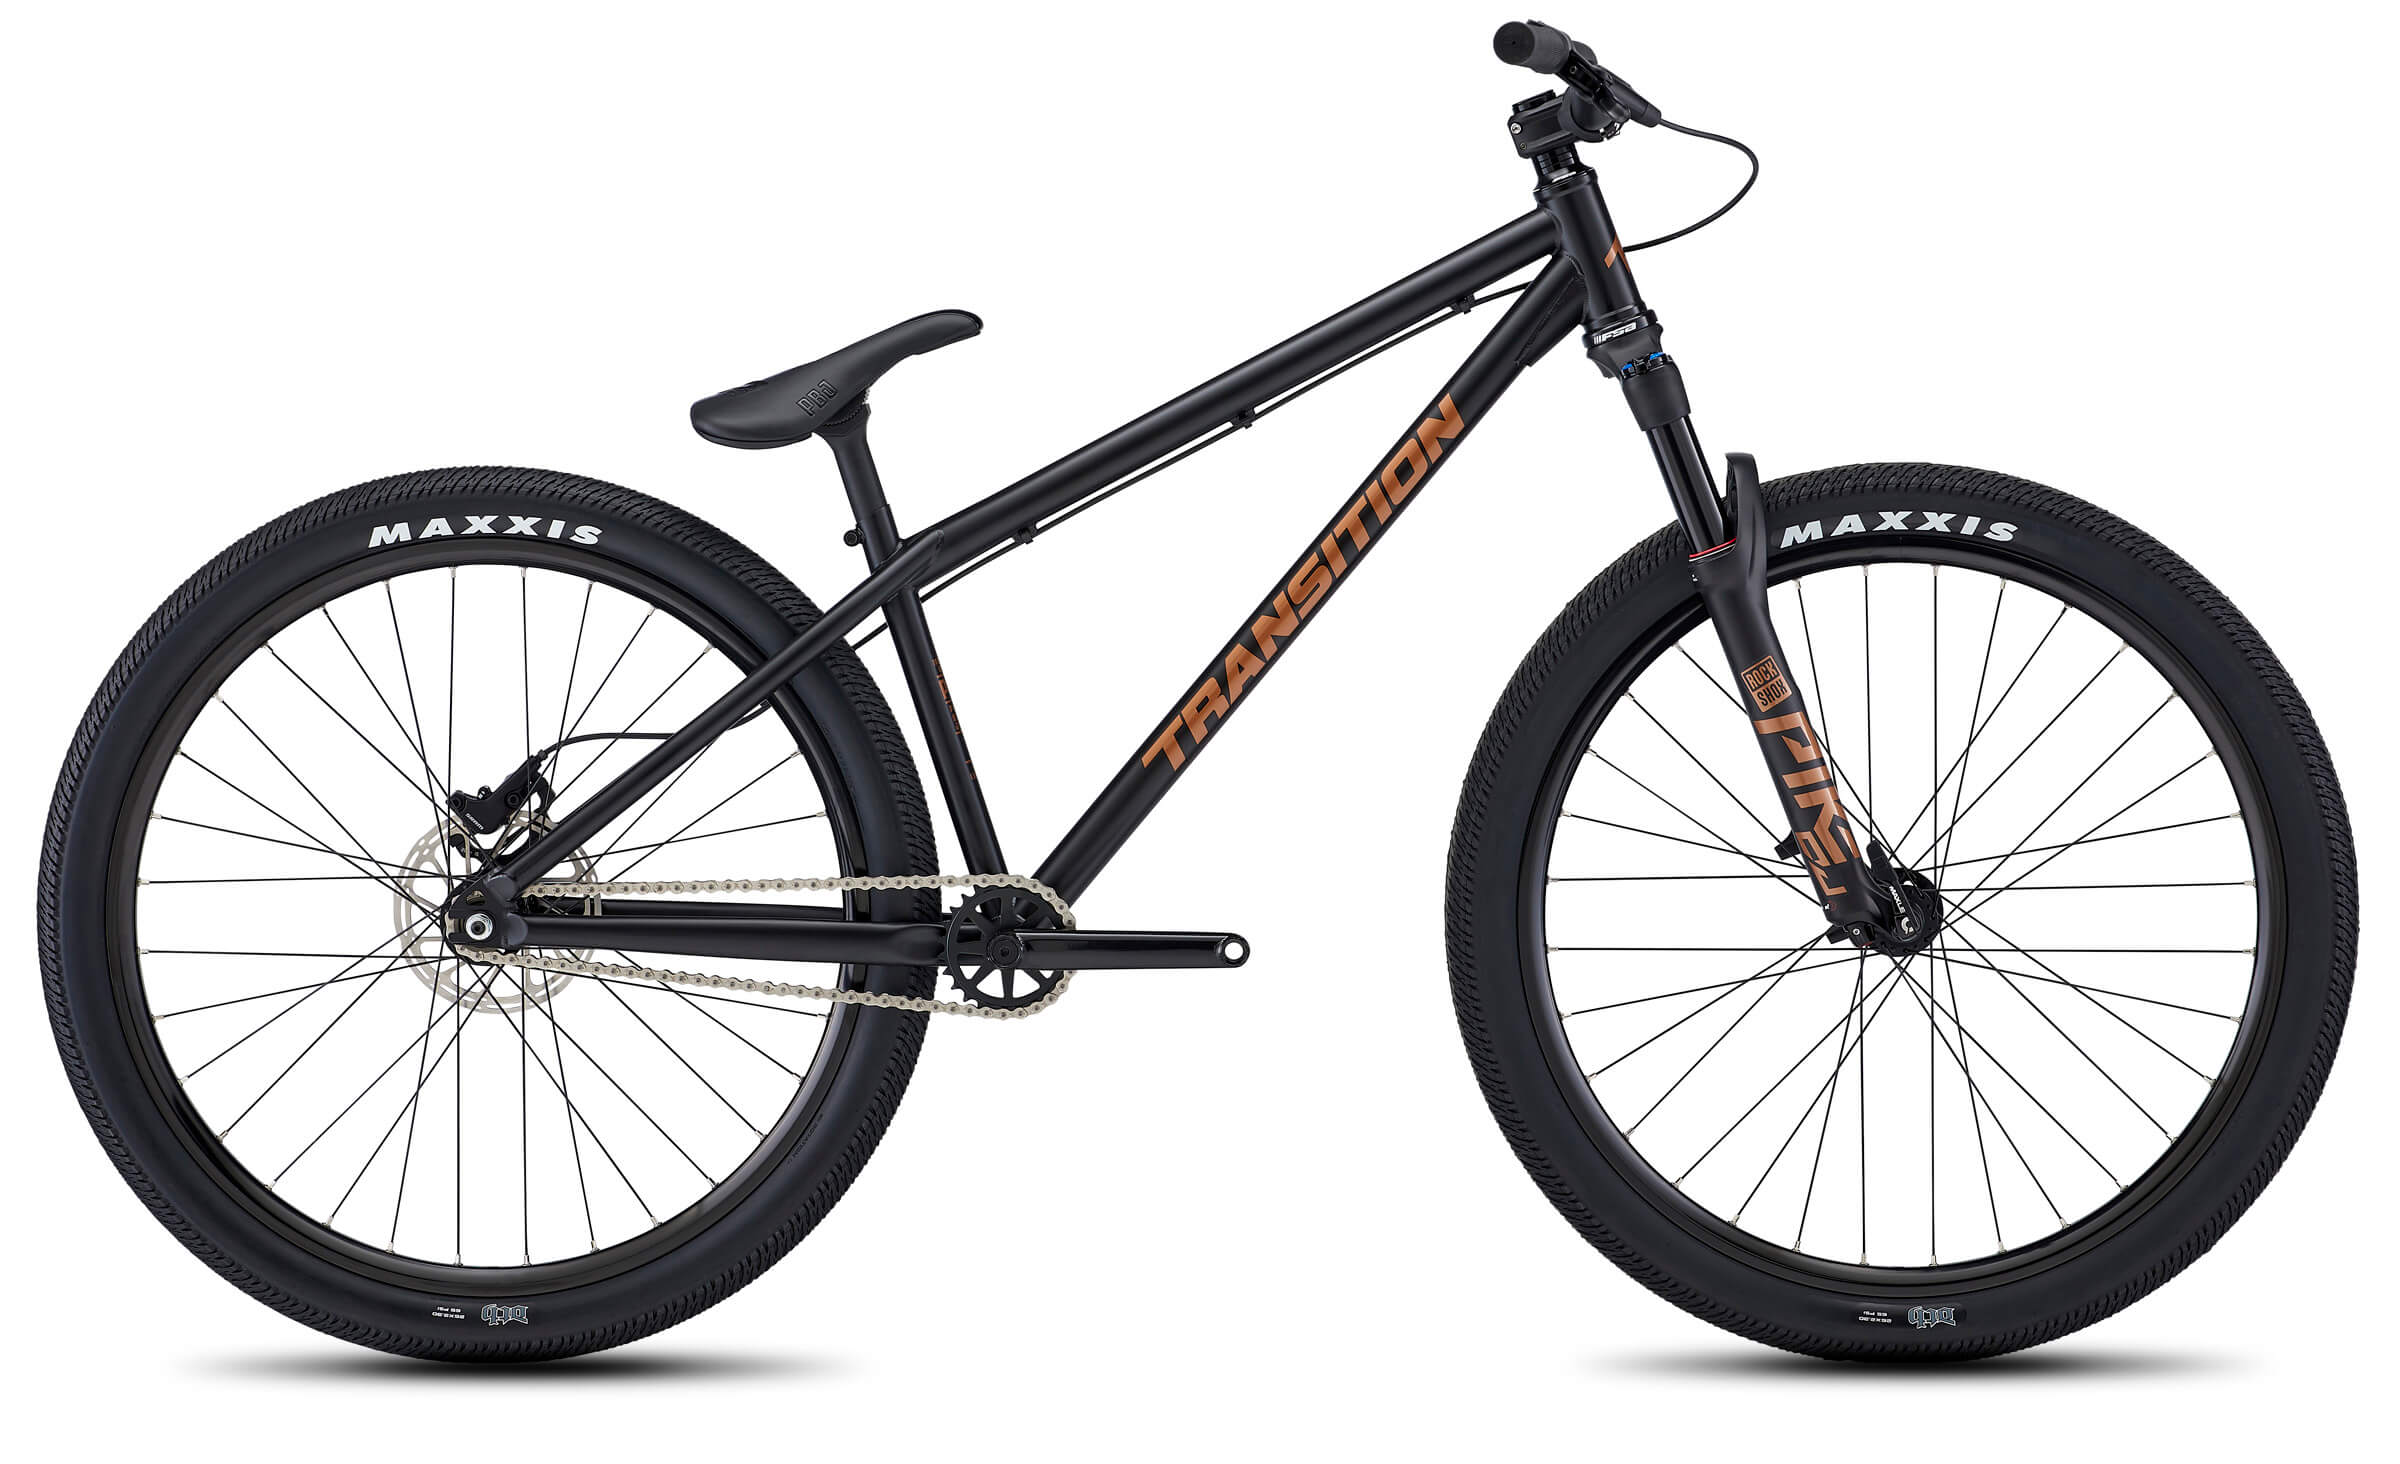 used transition bikes for sale